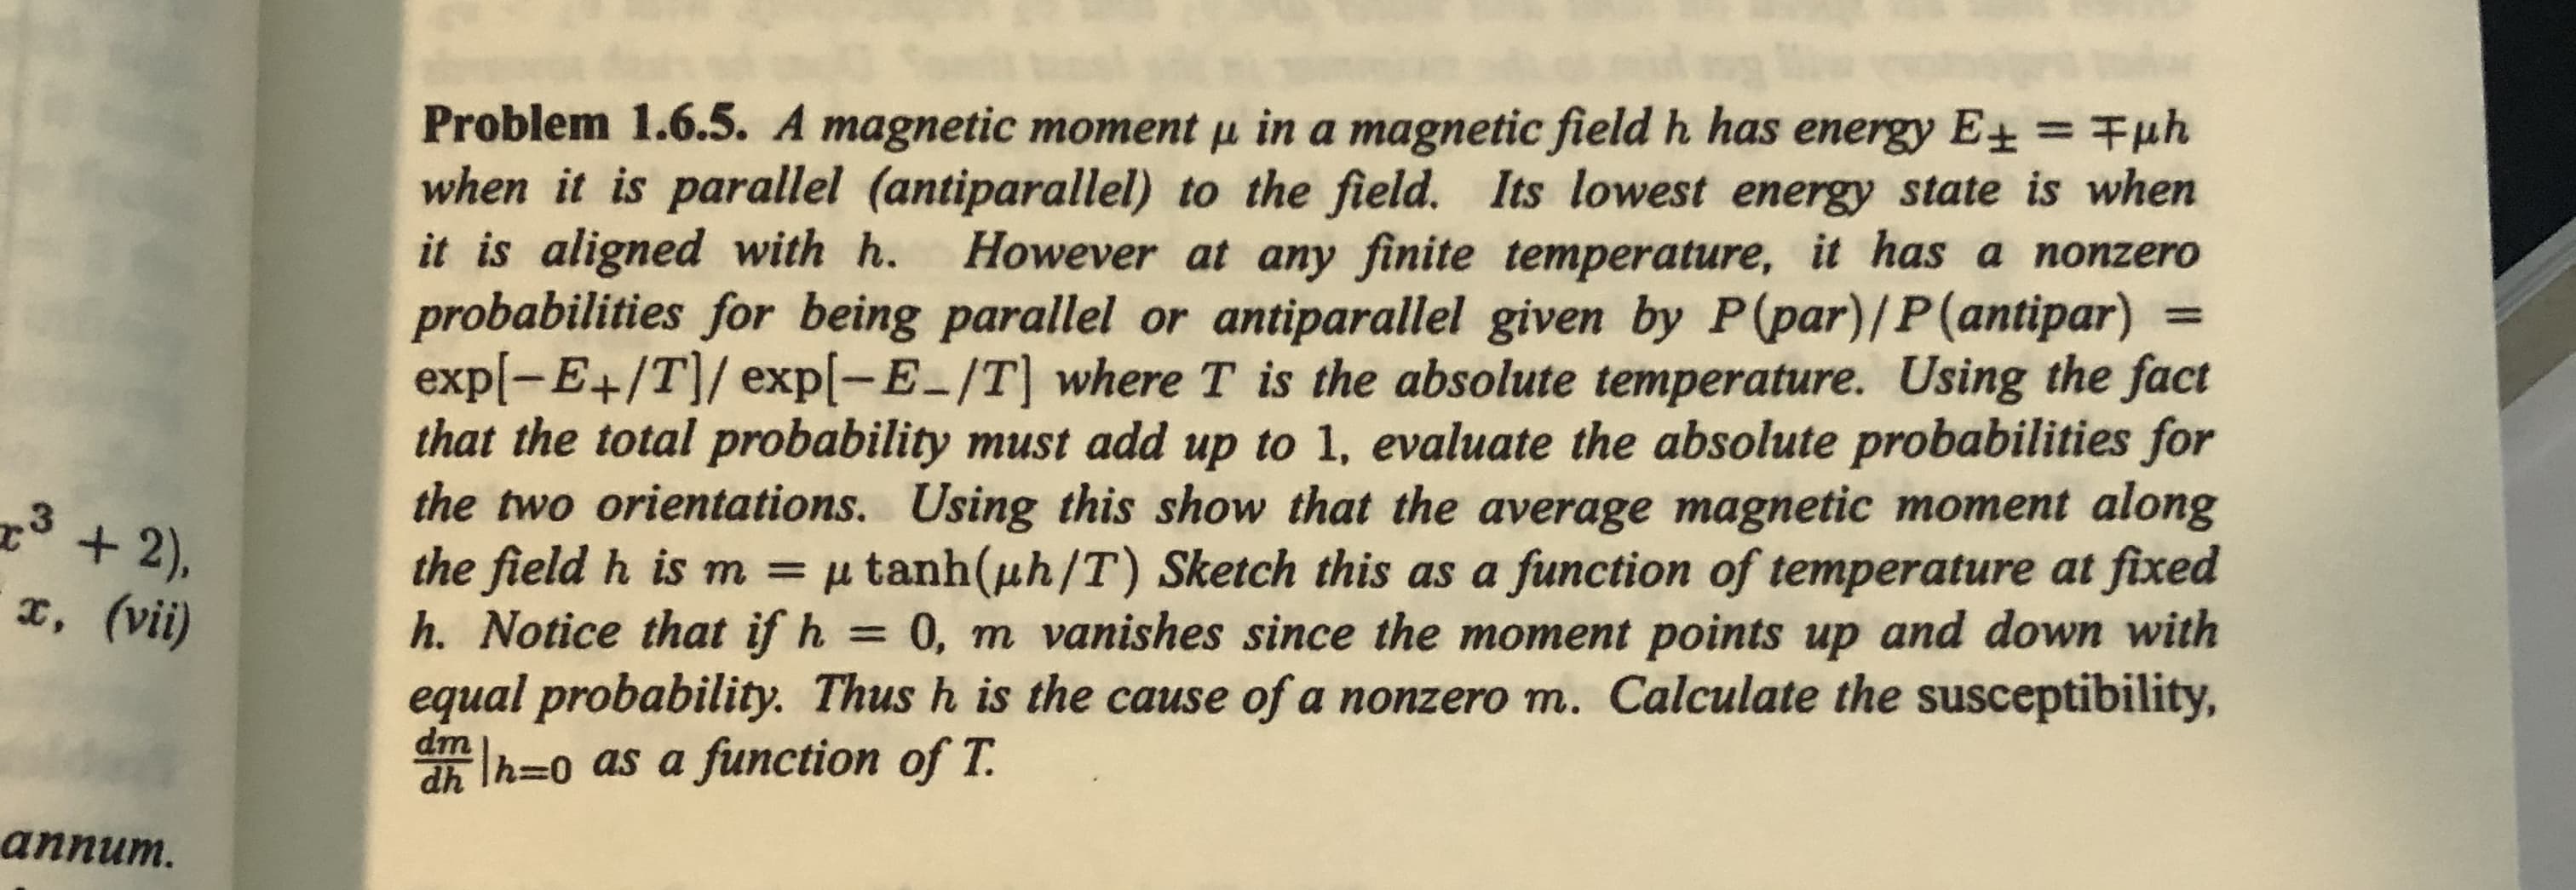 Problem 1.6.5. A magnetic moment µ in a magnetic field h has energy E+ = Fµh
when it is parallel (antiparallel) to the field. Its lowest energy state is when
it is aligned with h.
probabilities for being parallel or antiparallel given by P(par)/P(antipar) =
exp(-E+/T]/ exp[-E-/T] where T is the absolute temperature. Using the fact
that the total probability must add up to 1, evaluate the absolute probabilities for
the two orientations. Using this show that the average magnetic moment along
the field h is m = µ tanh(uh/T) Sketch this as a function of temperature at fixed
h. Notice that if h = 0, m vanishes since the moment points up and down with
%3D
However at any finite temperature, it has a nonzero
%3D
equal probability. Thus h is the cause of a nonzero m. Calculate the susceptibility,
dm
lh=0 as a function of T.
